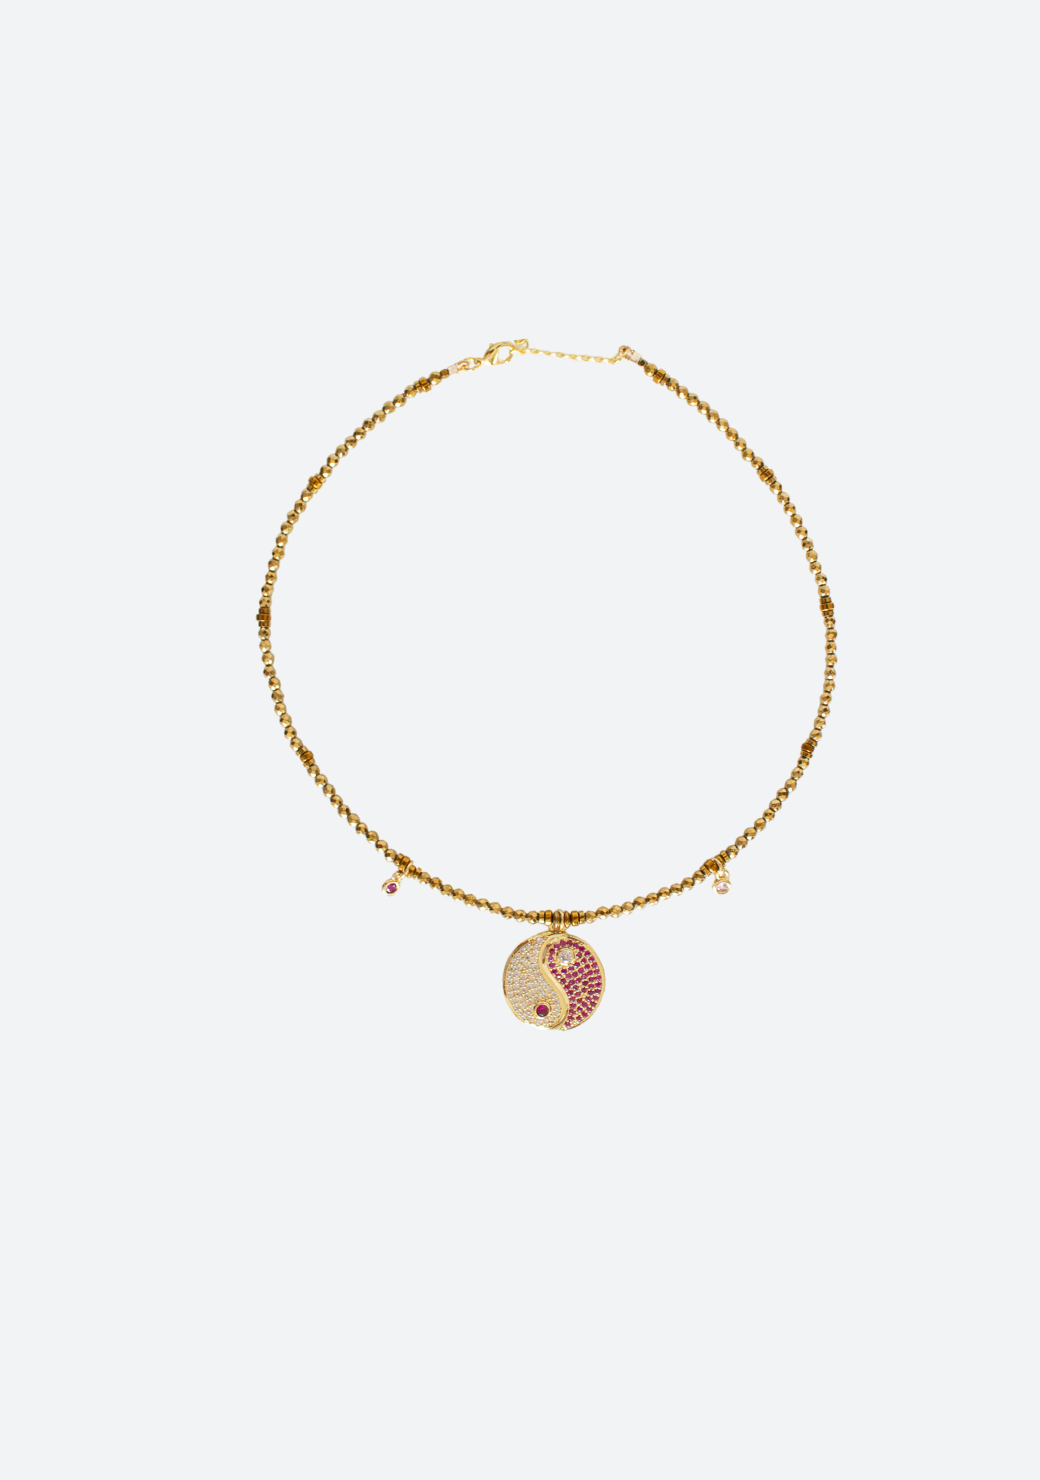 Keira Necklace in Gold with Yin Yang Pendant